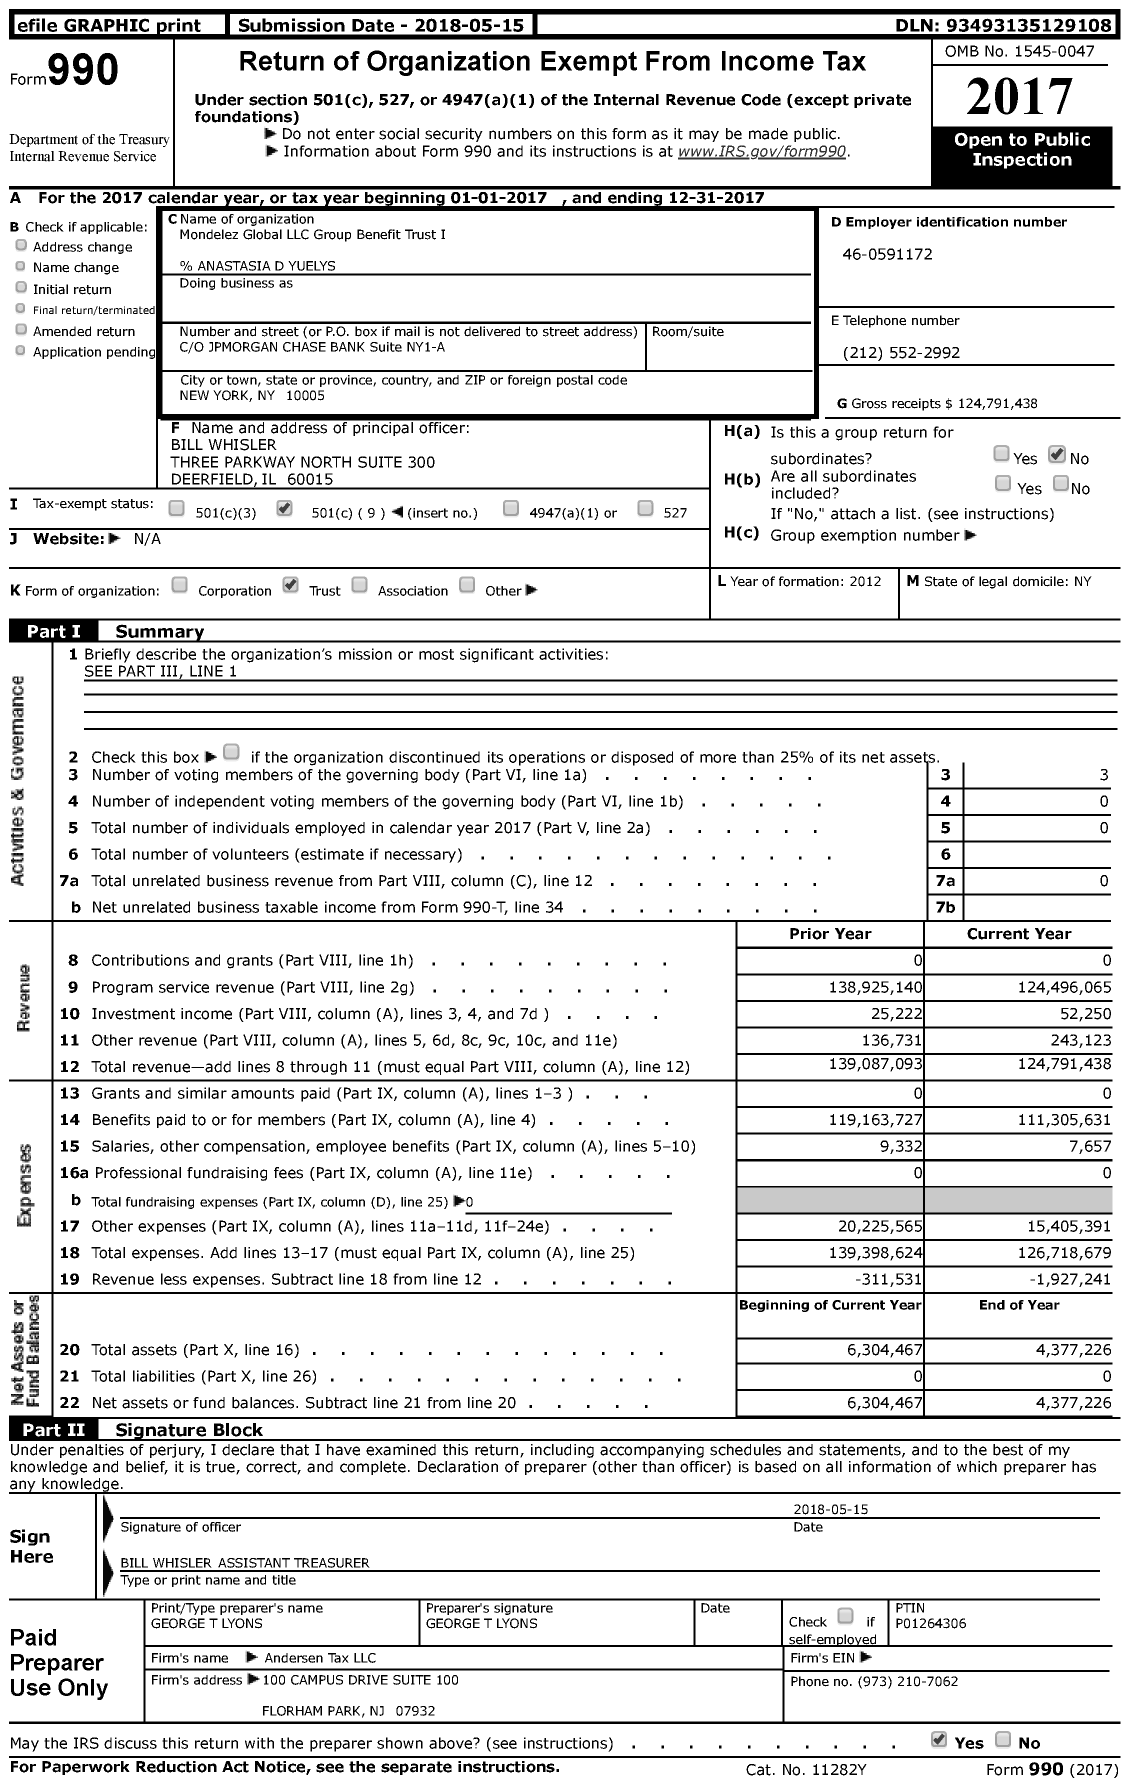 Image of first page of 2017 Form 990 for Mondelez Global LLC Group Benefit Trust I